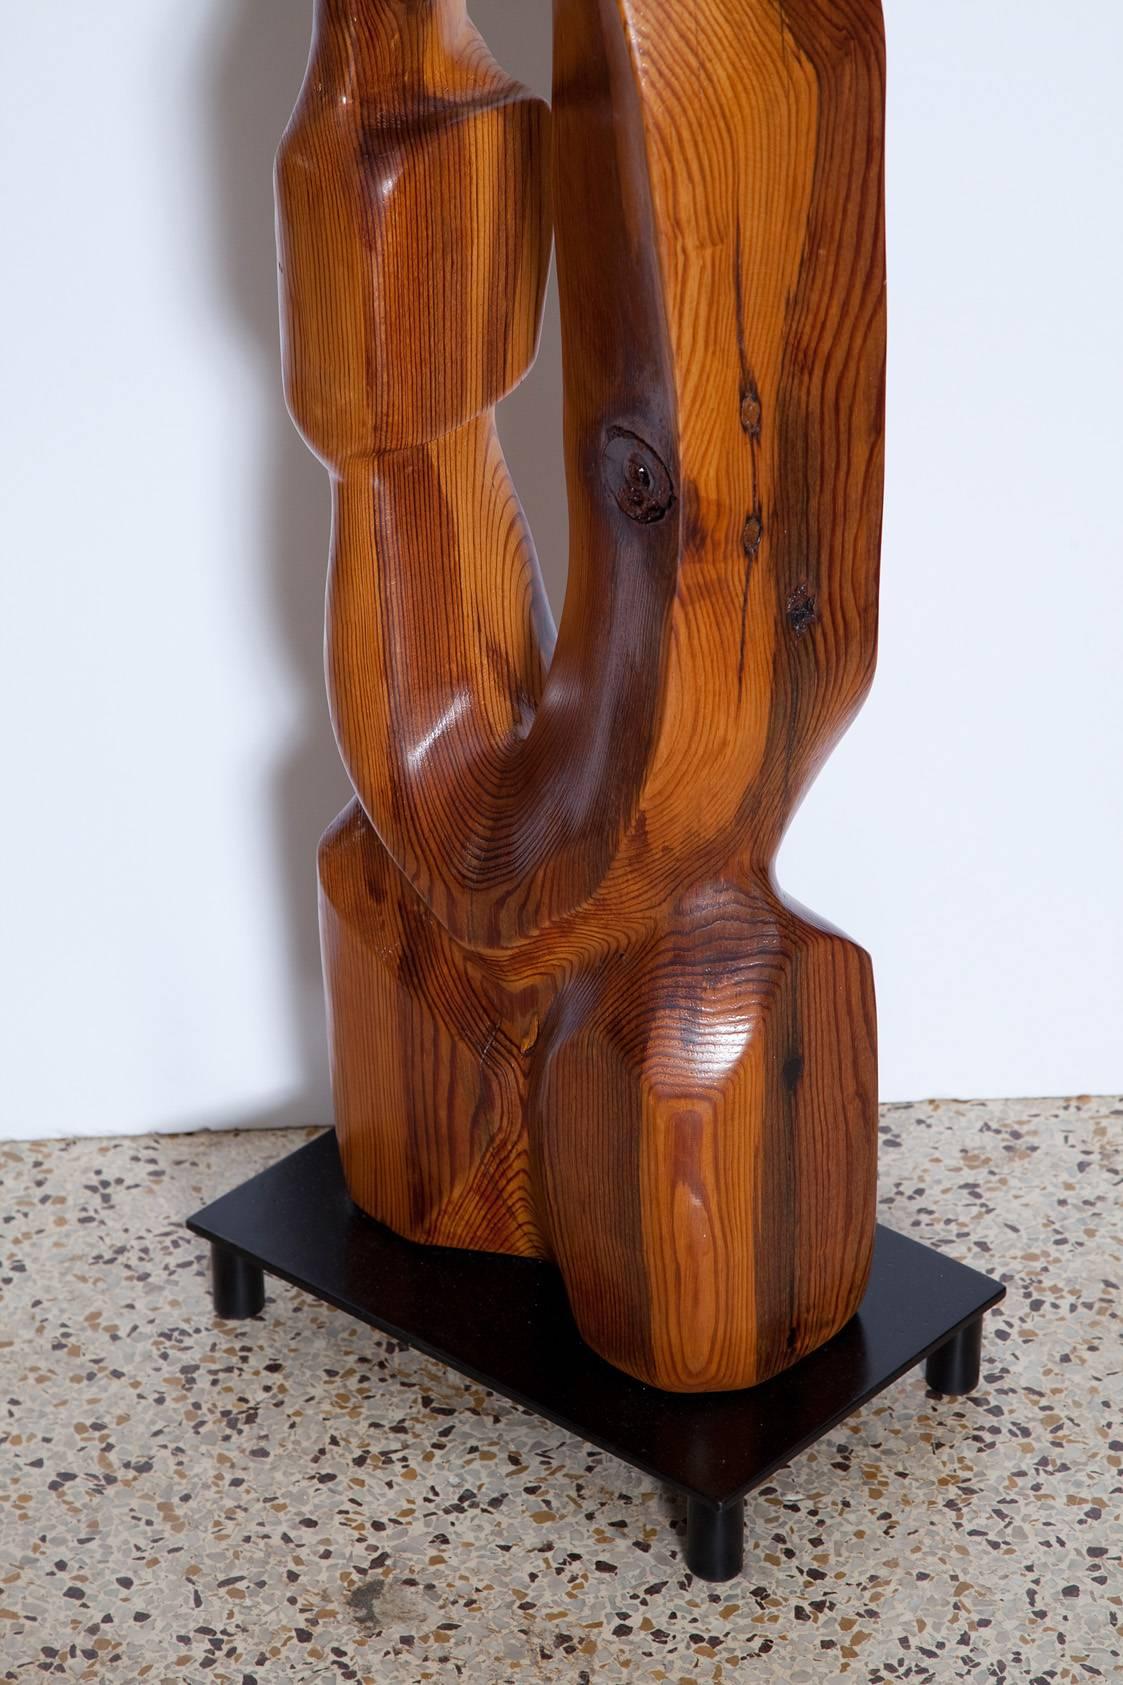 Hand-Carved Large Abstract 1960s Pine Floor Sculpture, Signed Vancho